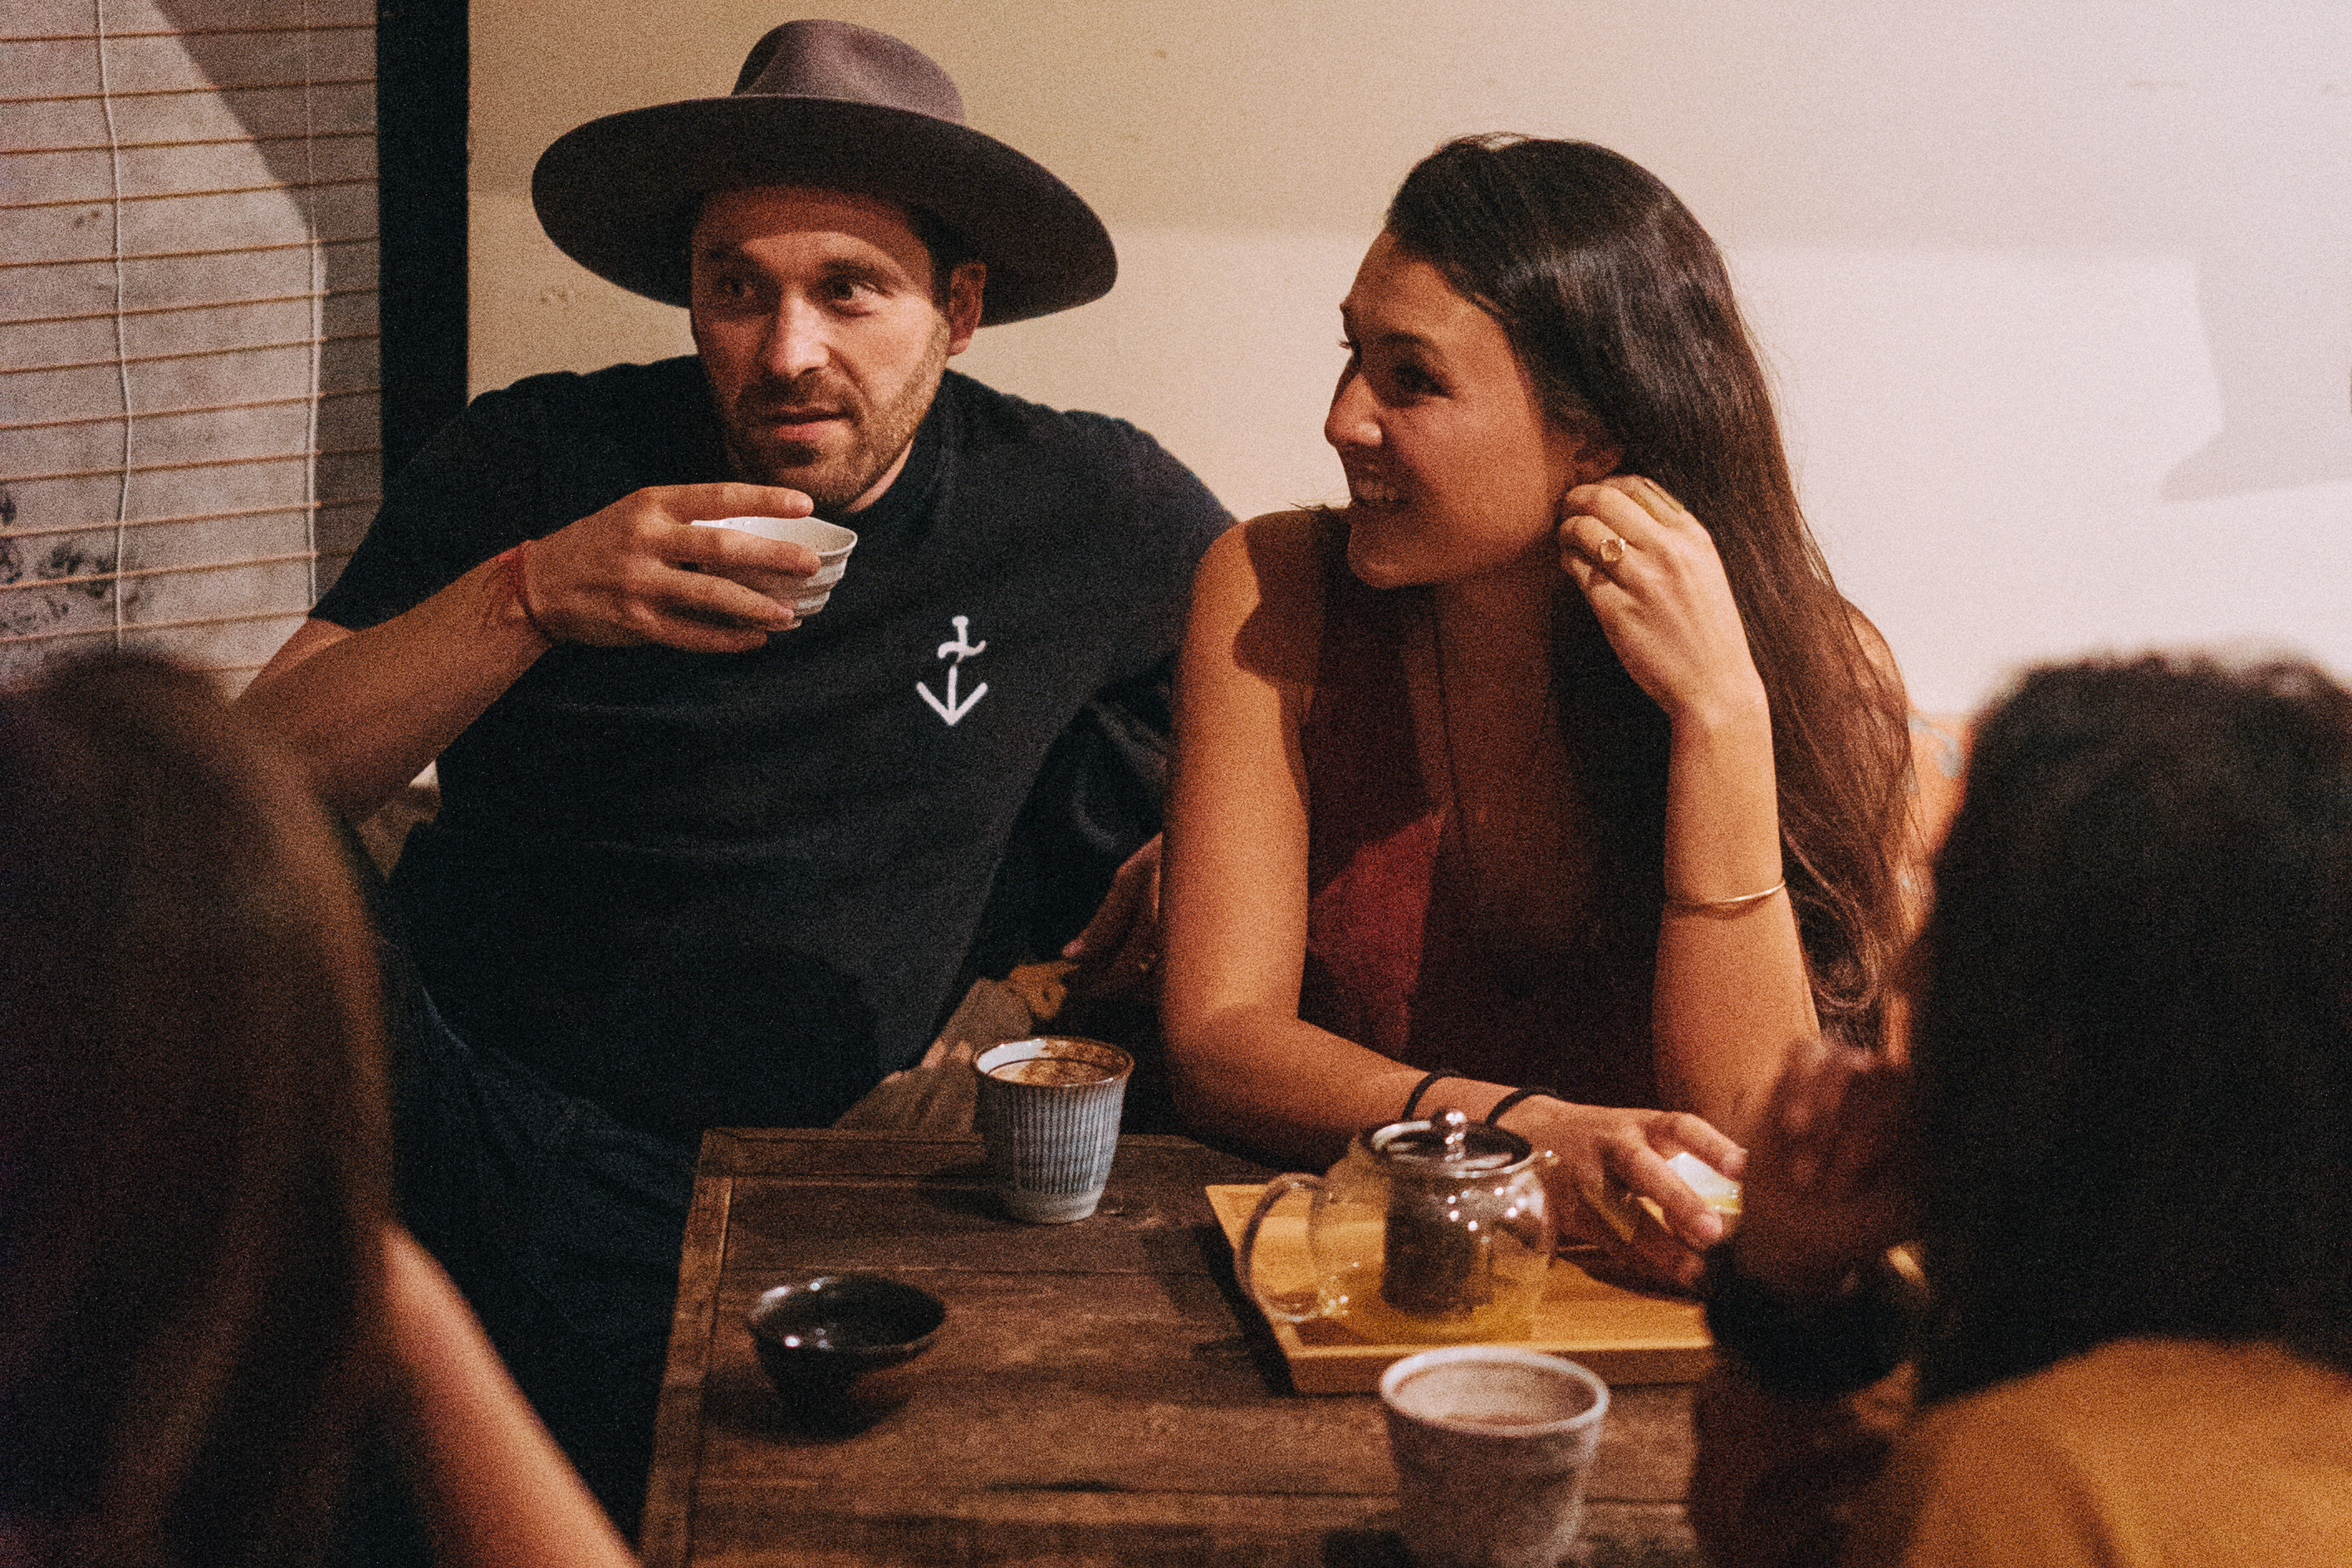 A man wearing a hat and a woman are sitting at a wooden table, chatting and enjoying drinks with others. The atmosphere is cozy and dimly lit.